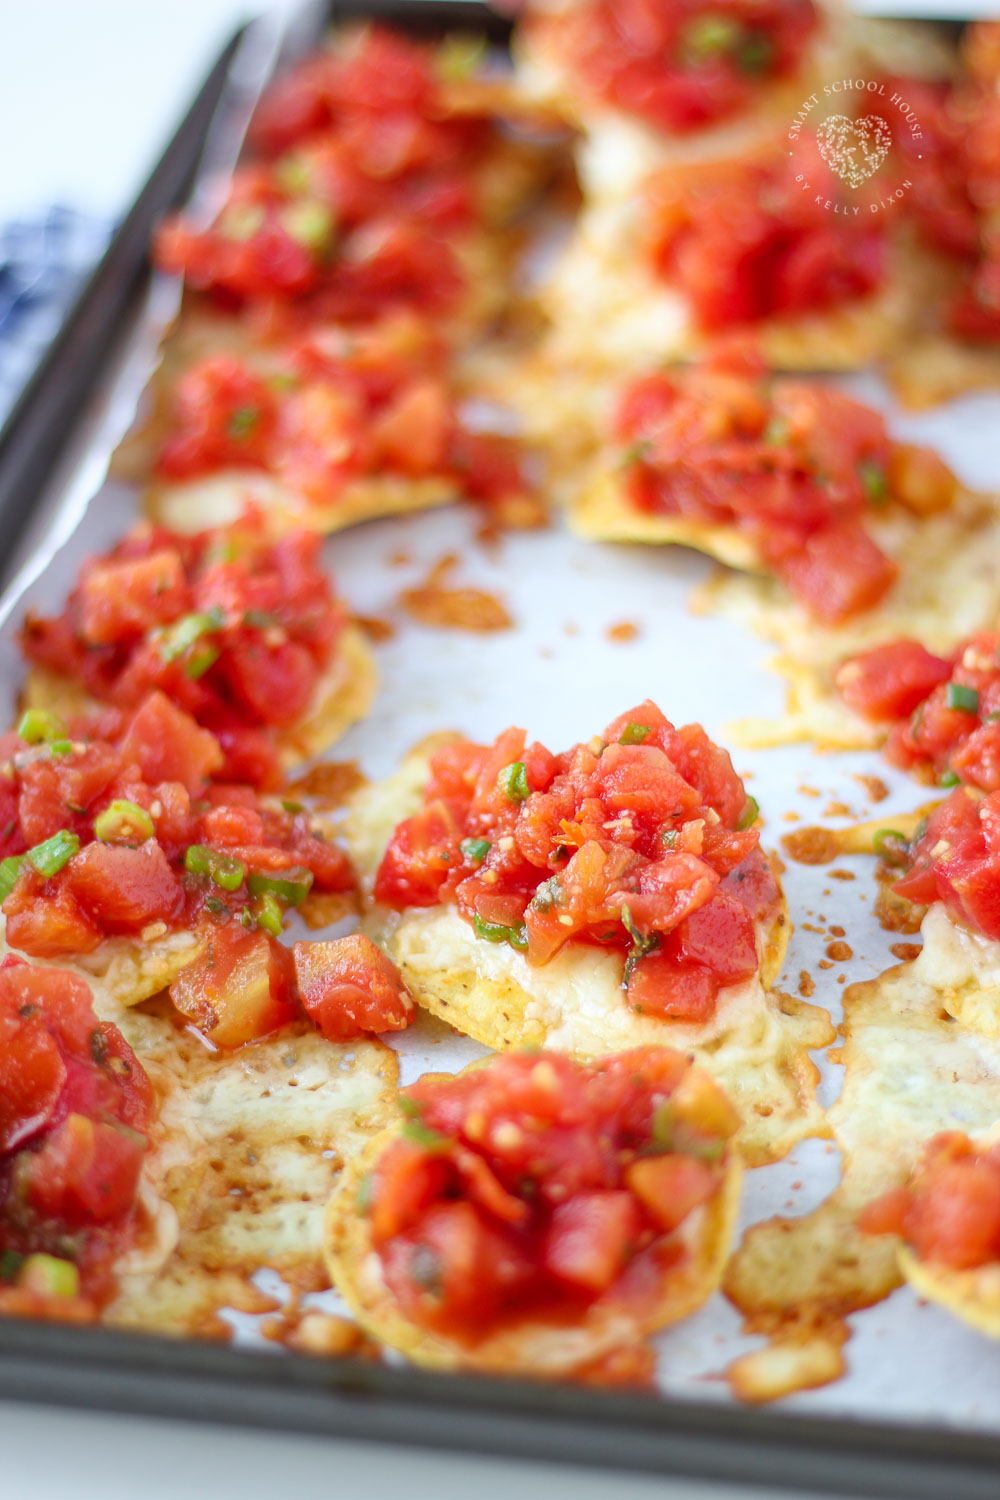 Easy tomato Bruschetta and Mozzarella Chips are always a crowd favorite over the holidays, at parties or even as a quick appetizer before dinner at home.